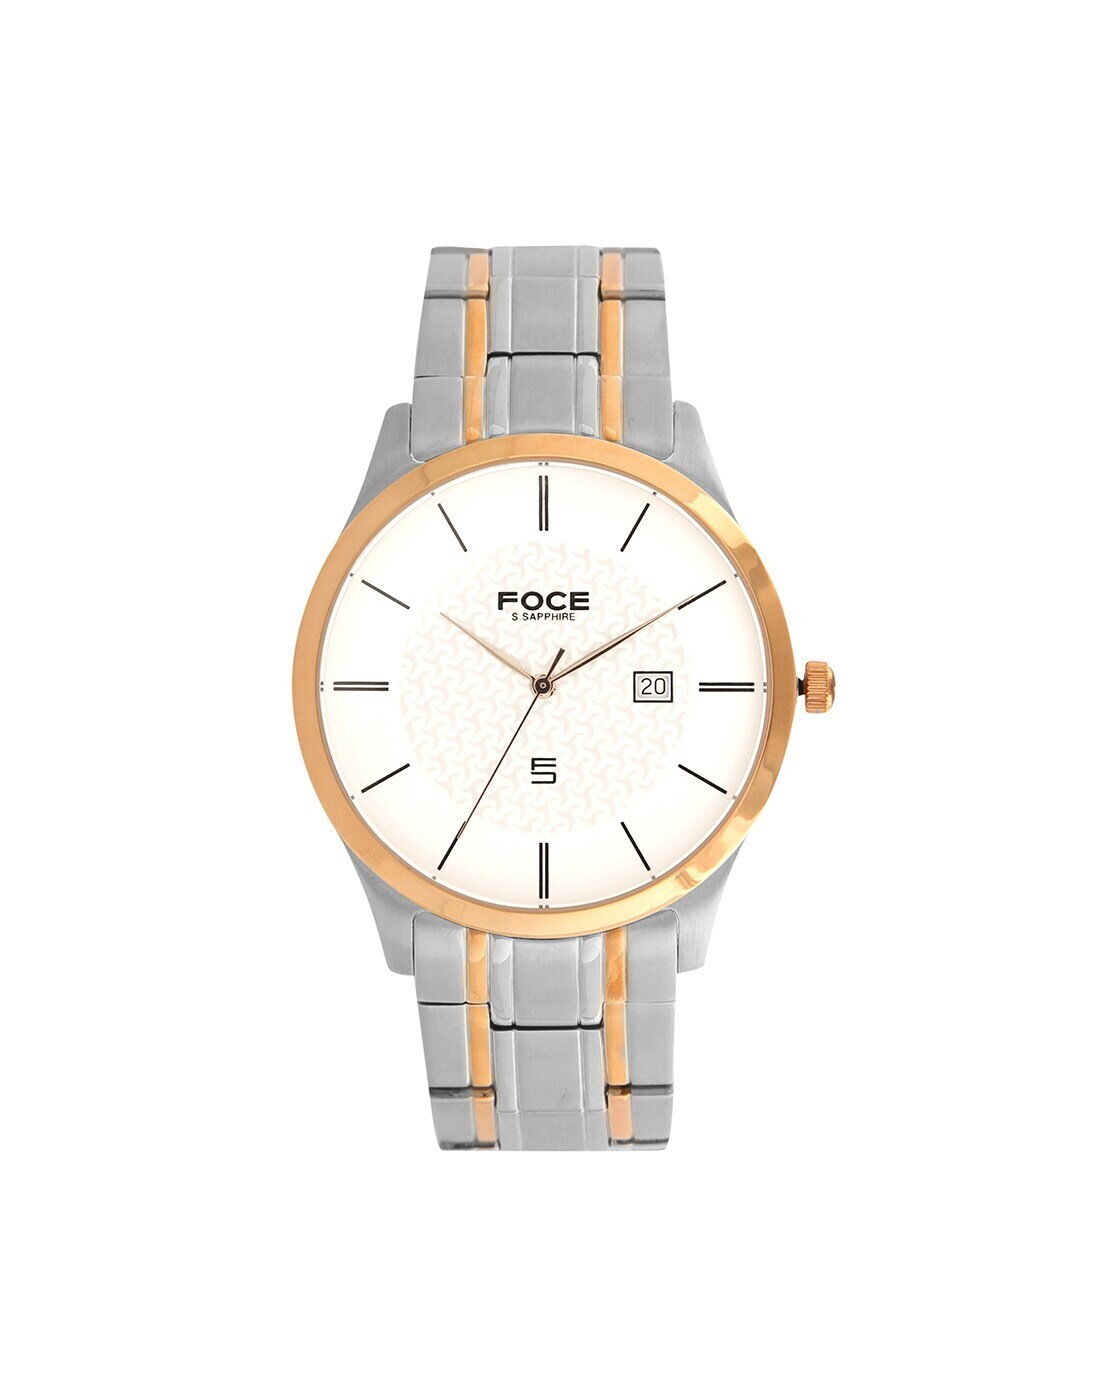 FOCE Chronograph White Dial Leather Strap Watch For Men-F988GSL – Foce India